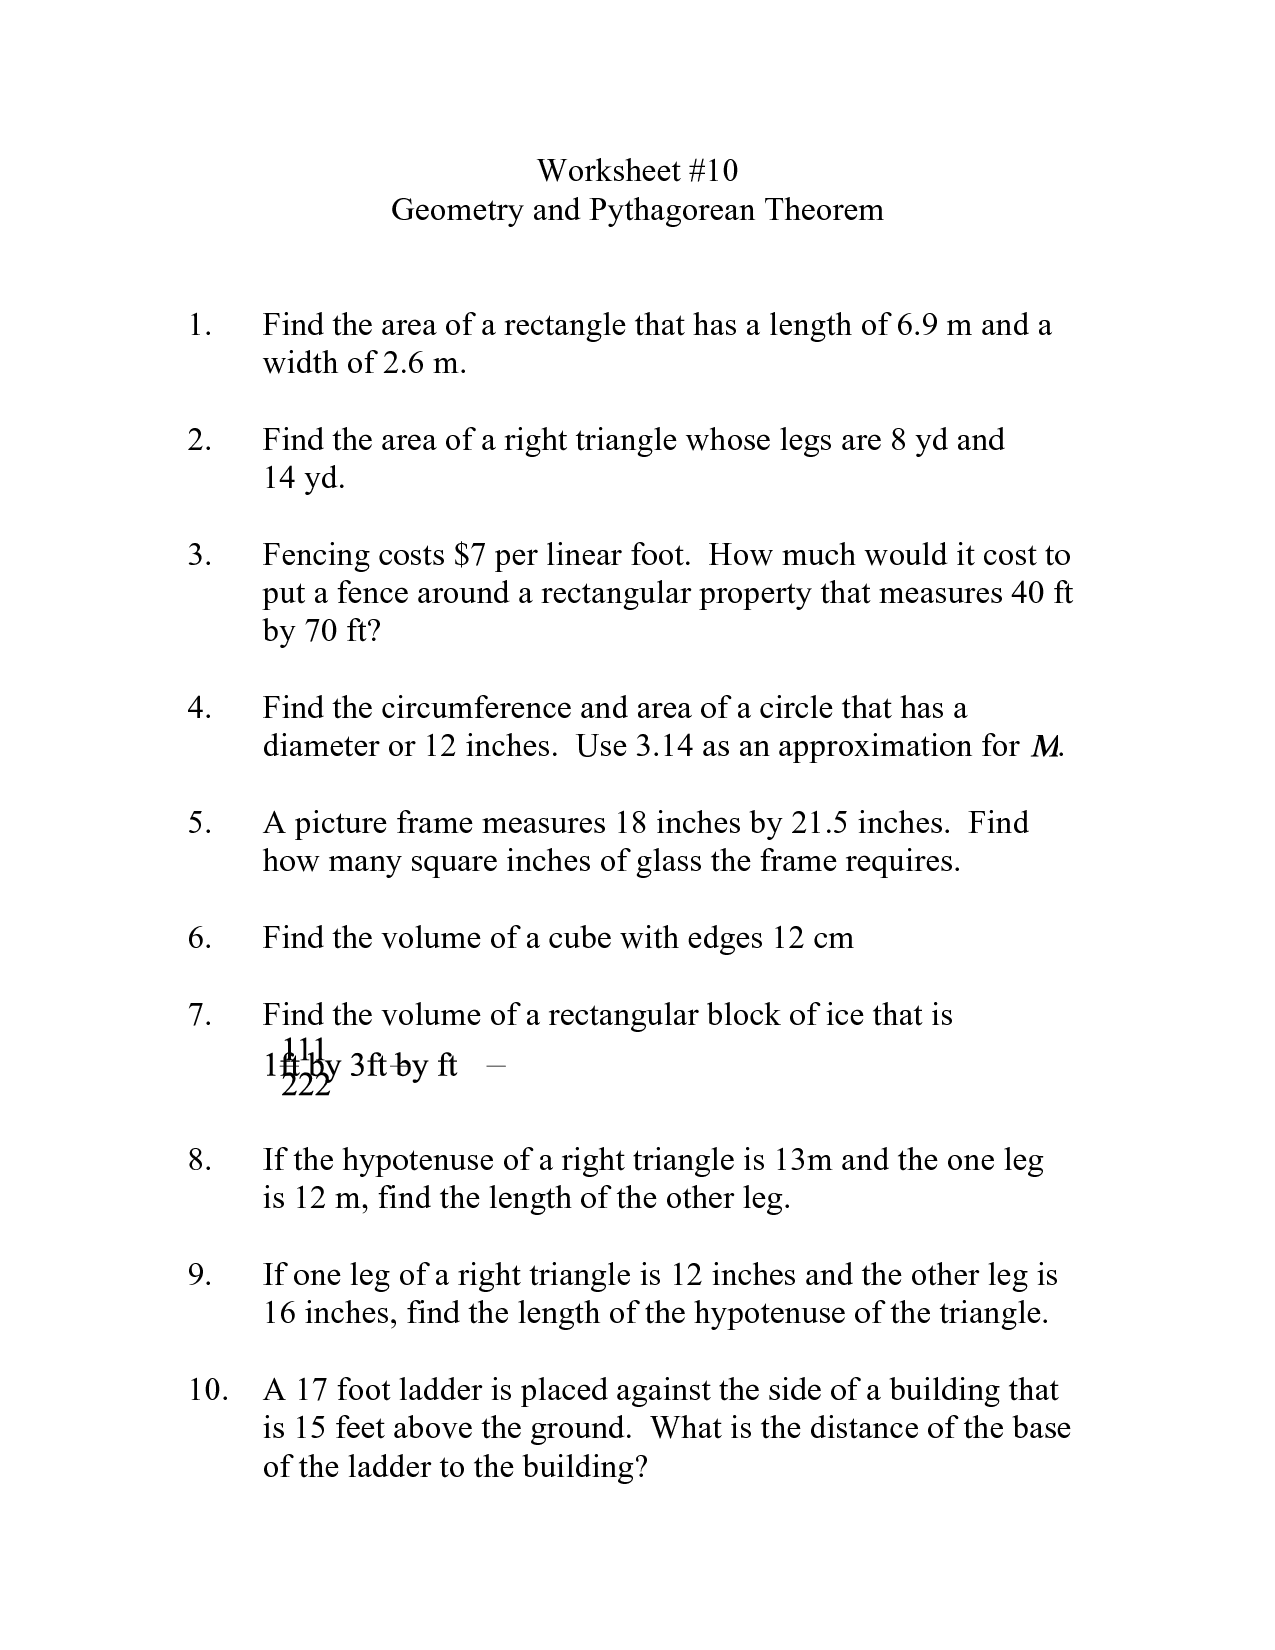 9-best-images-of-pythagorean-theorem-word-problems-worksheet-answers-pythagorean-theorem-word